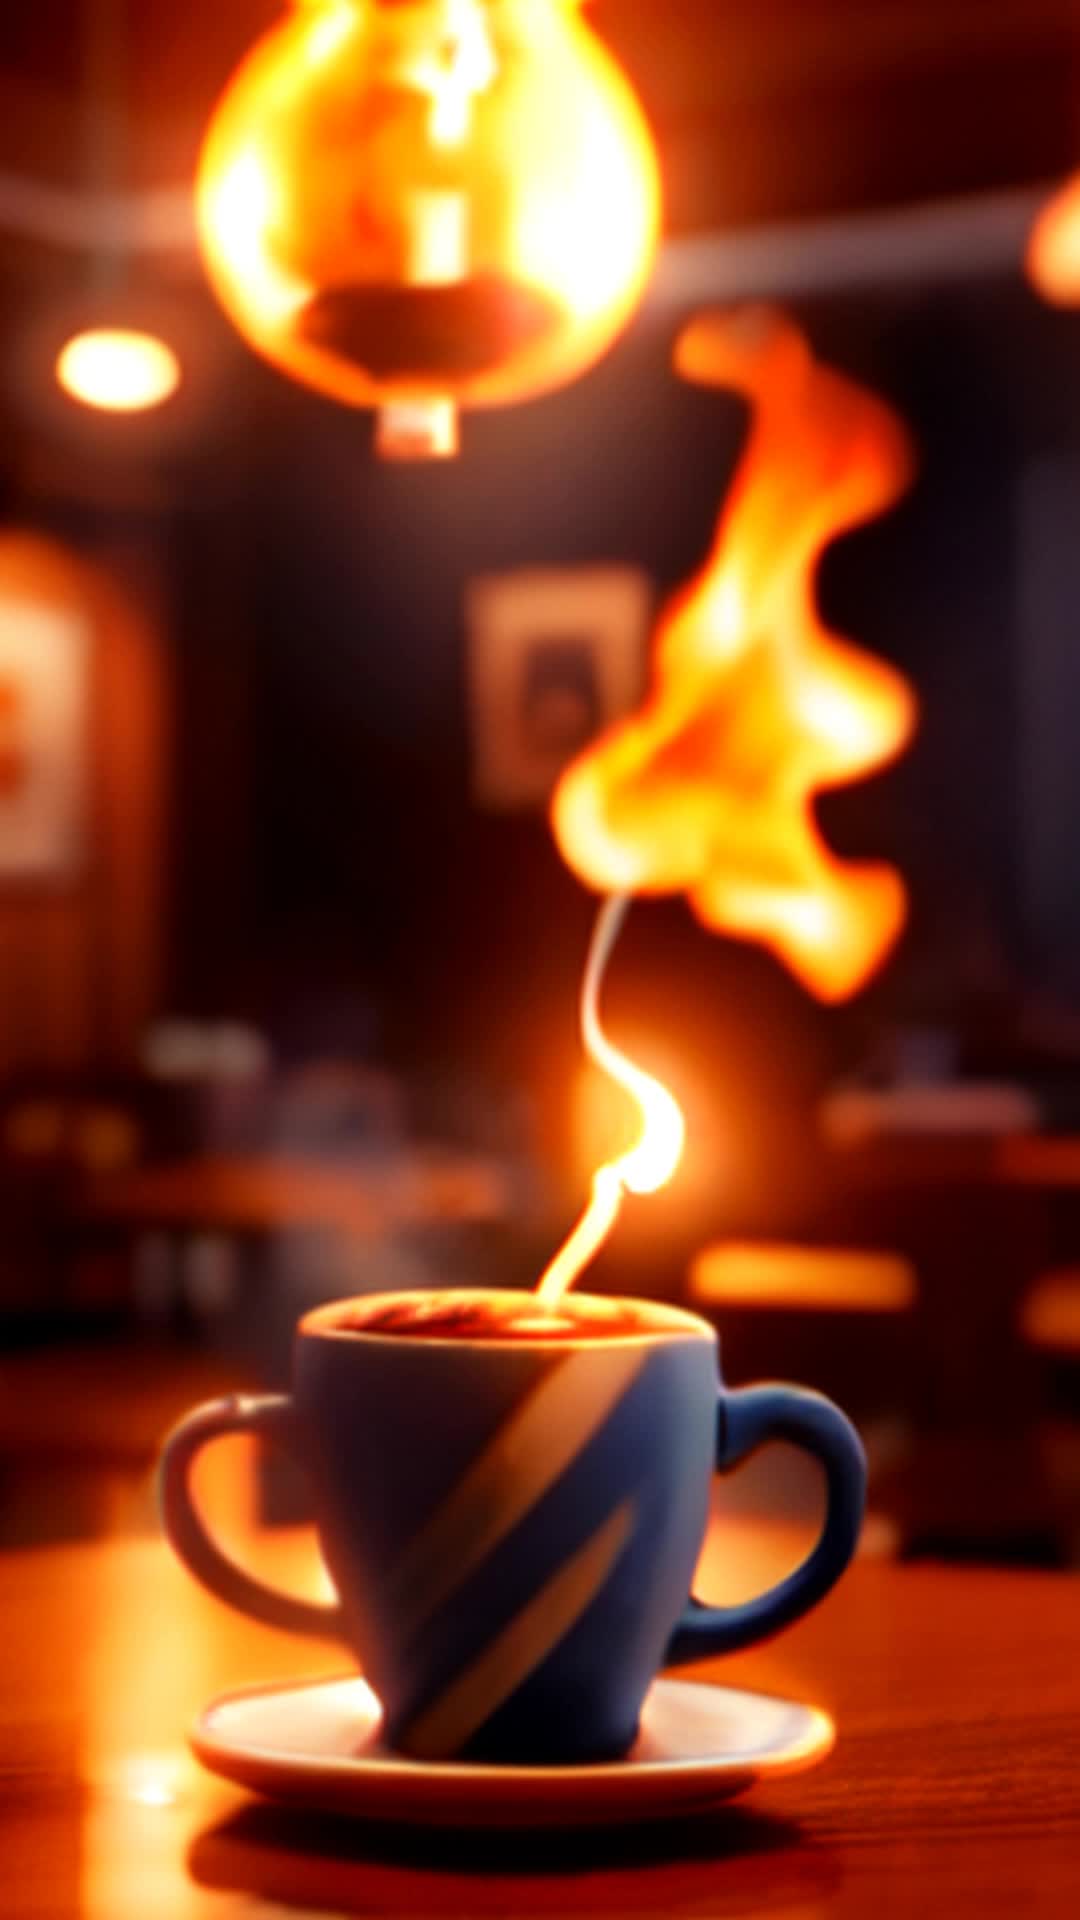 make the background completely dark and then have a light bulb from the ceiling shine on a smoking cup of coffee on a table